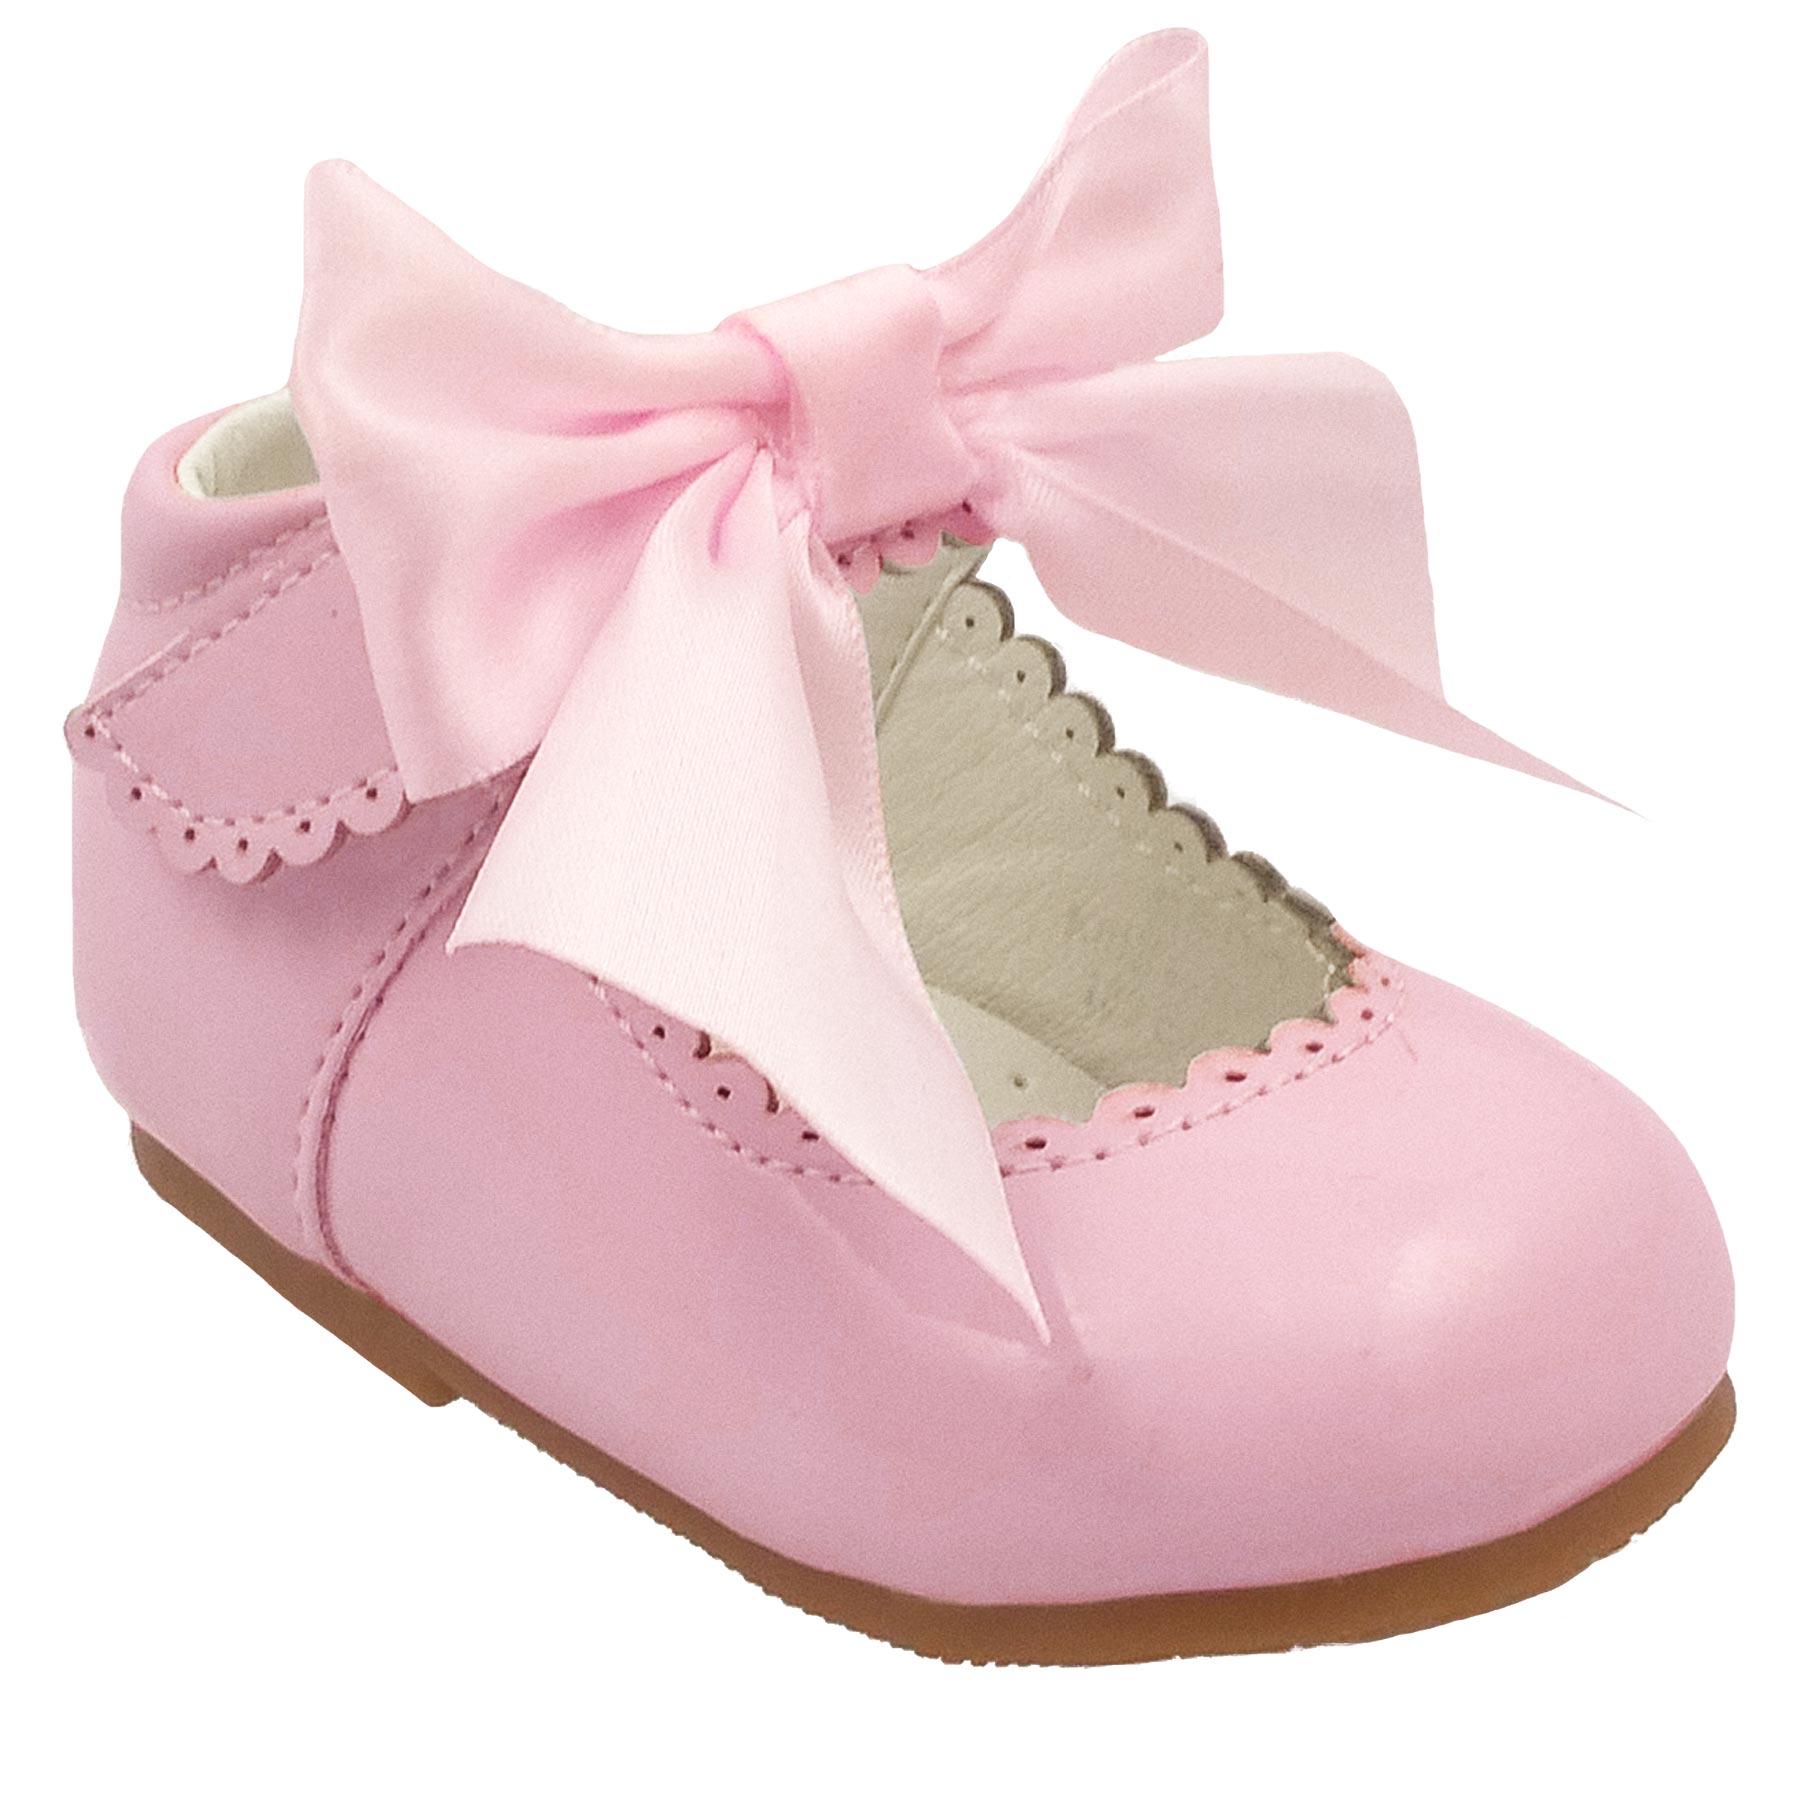 Tia London 8500 Patent Pink Bow Shoes